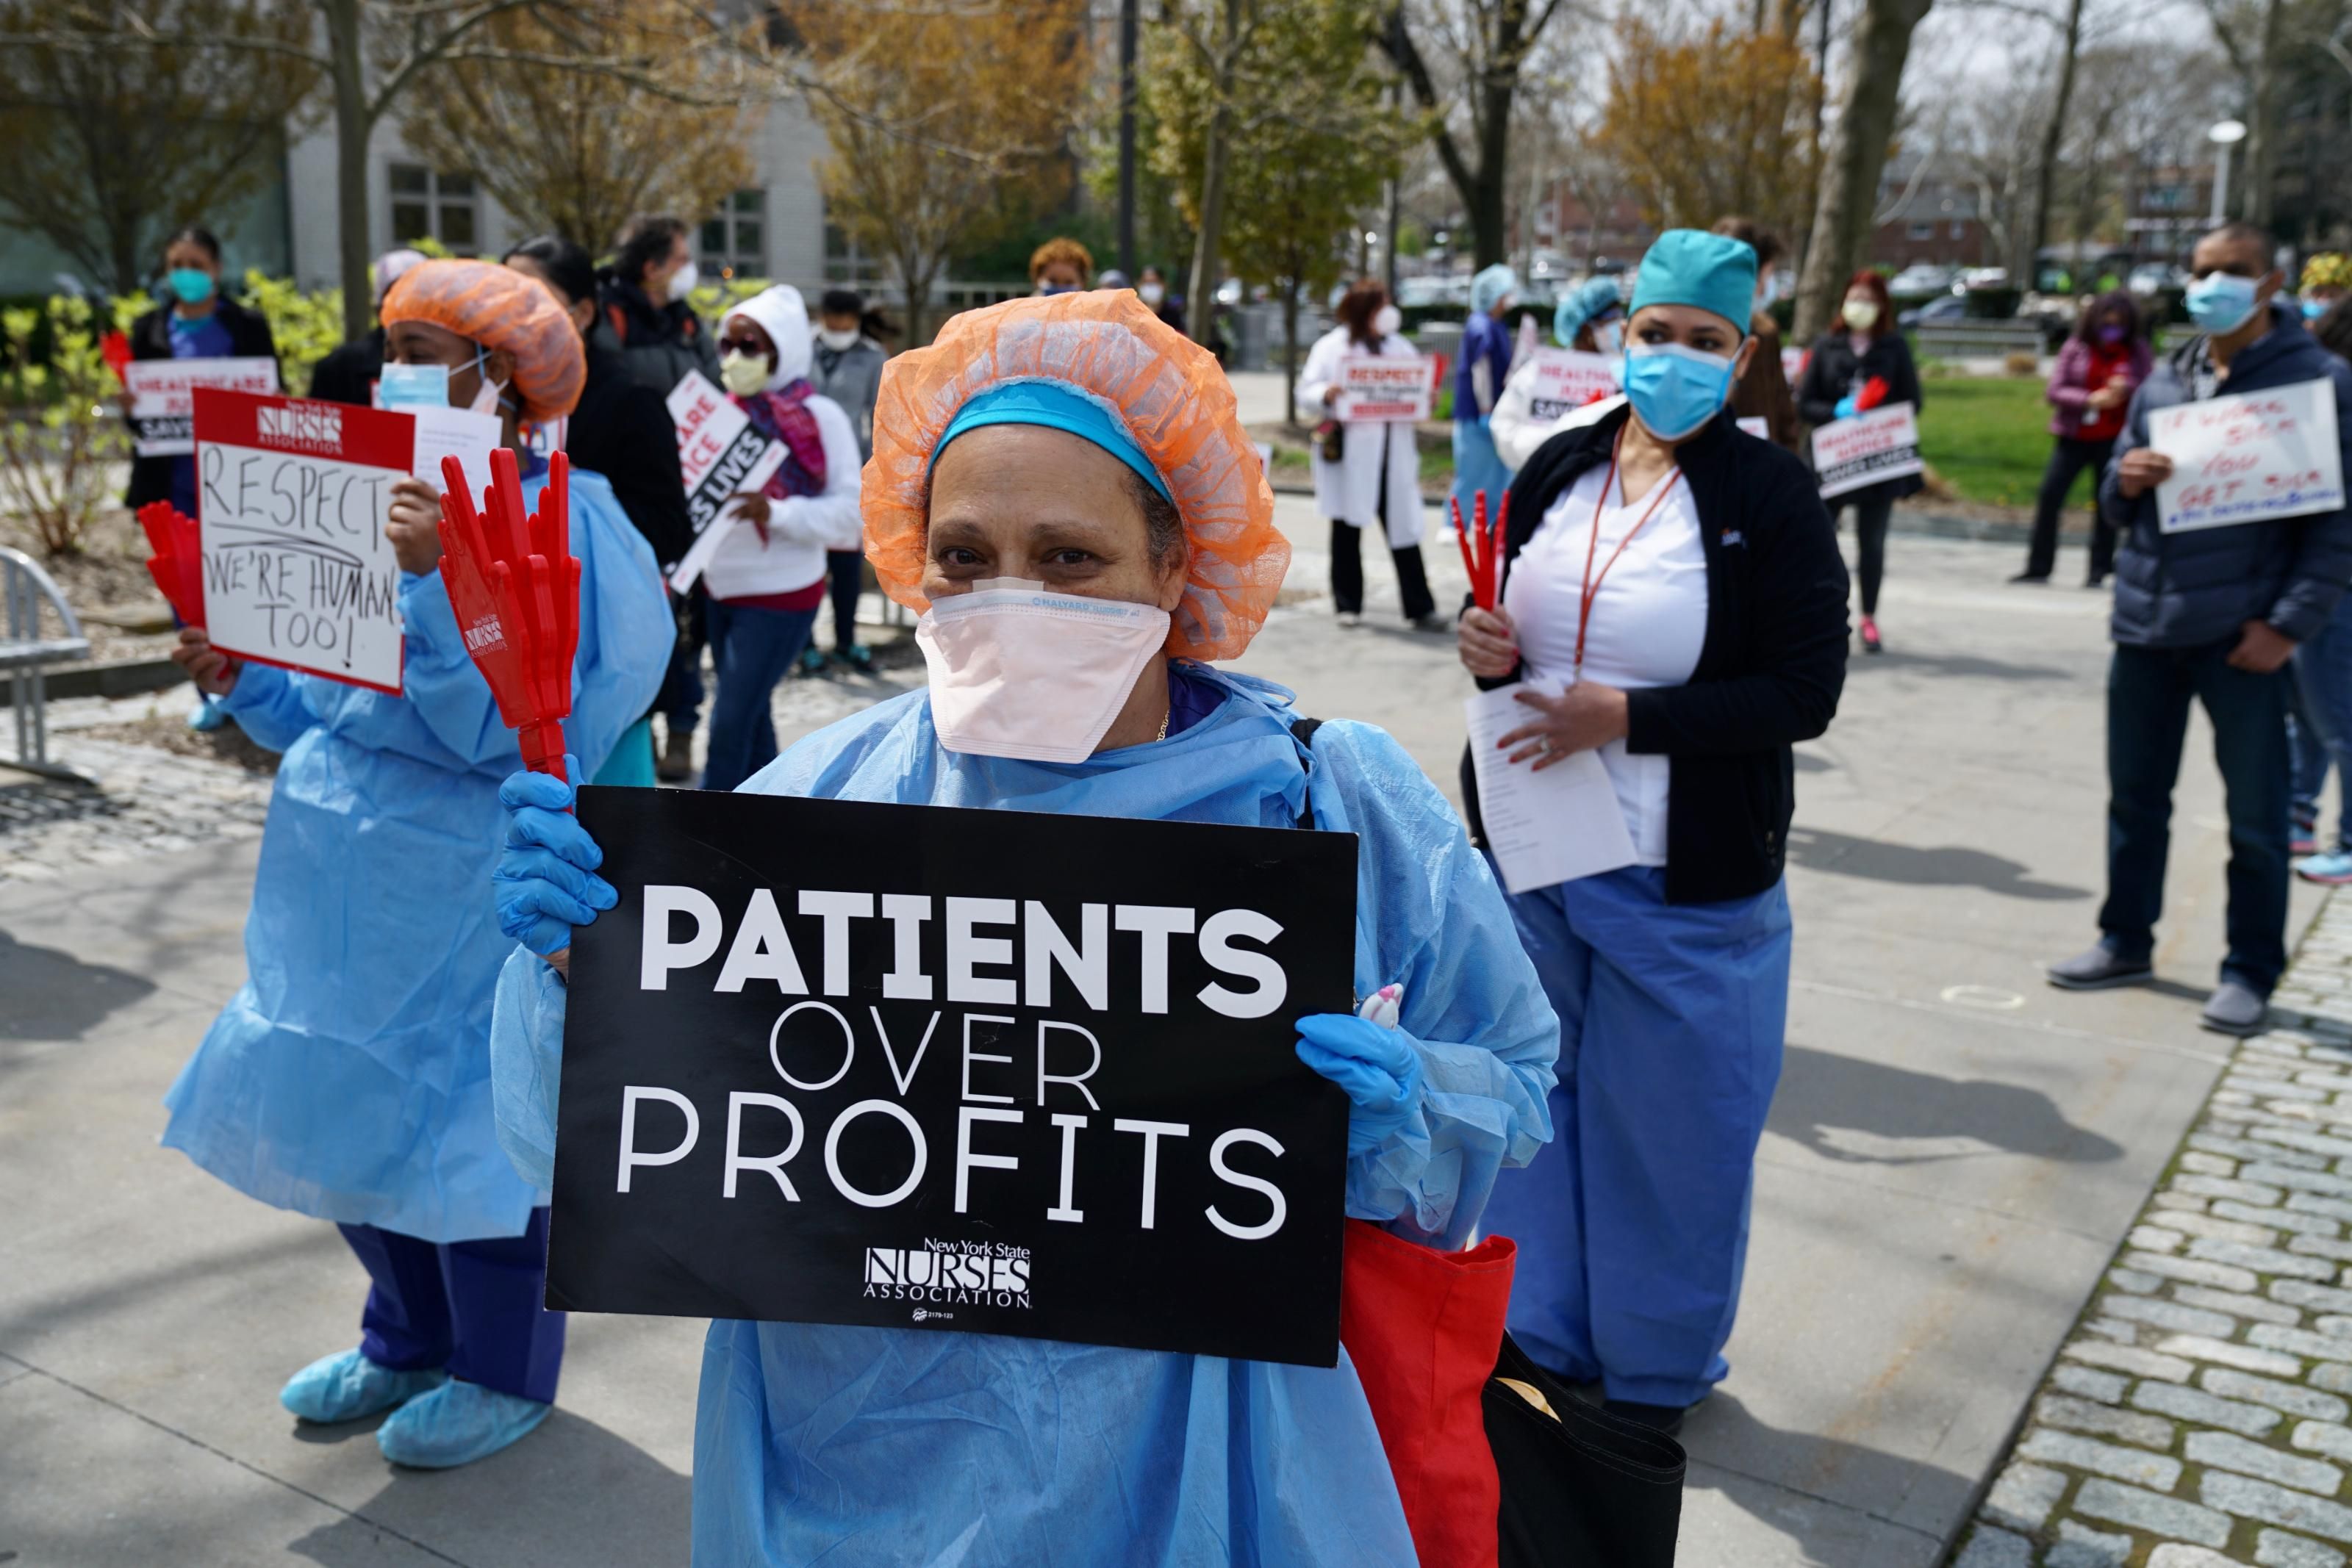 Public health workers, doctors, and nurses protest over lack of sick pay and personal protective equipment outside a hospital in the Bronx on April 17, 2020. (Photo: Giles Clarke via Getty Images)